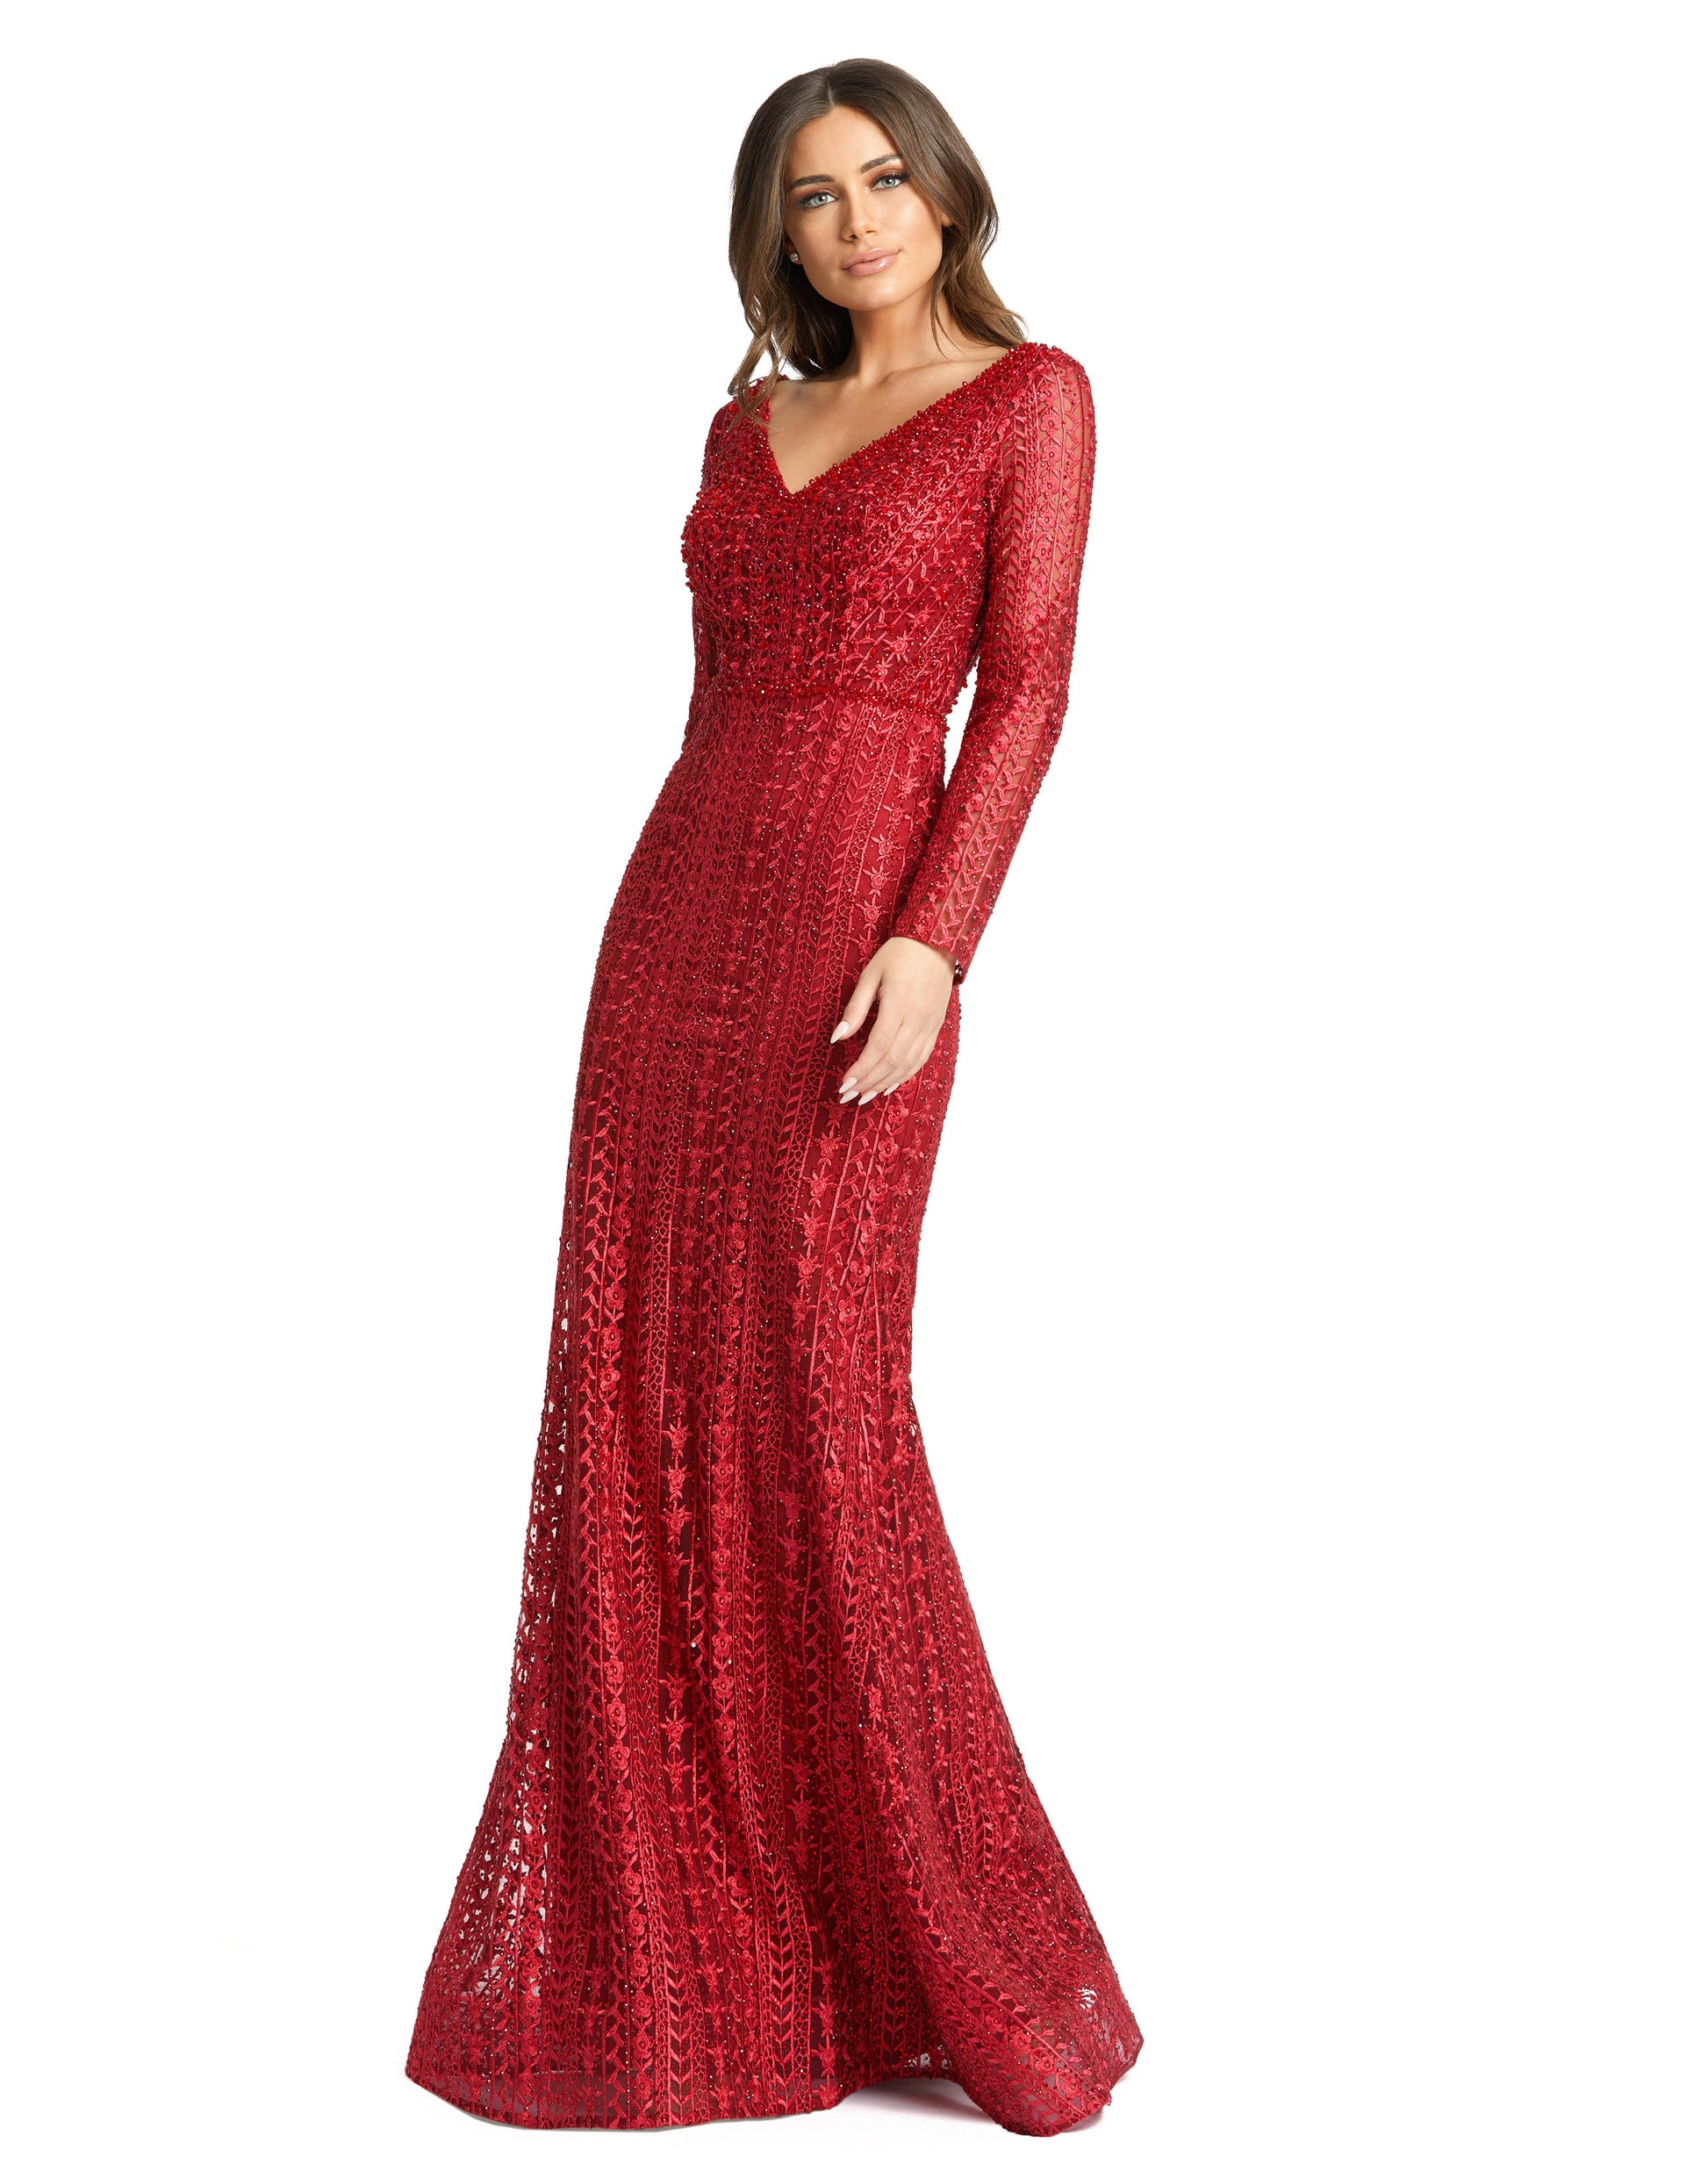 Mac Duggal Sheer embellished embroidered overlay; 100% polyester lining Fully lined through bodice and skirt; sheer unlined long sleeves V-neckline Long sleeves Beaded waist detail Sweeping train Concealed back zipper Approx. 62.5" from top of shoulder to